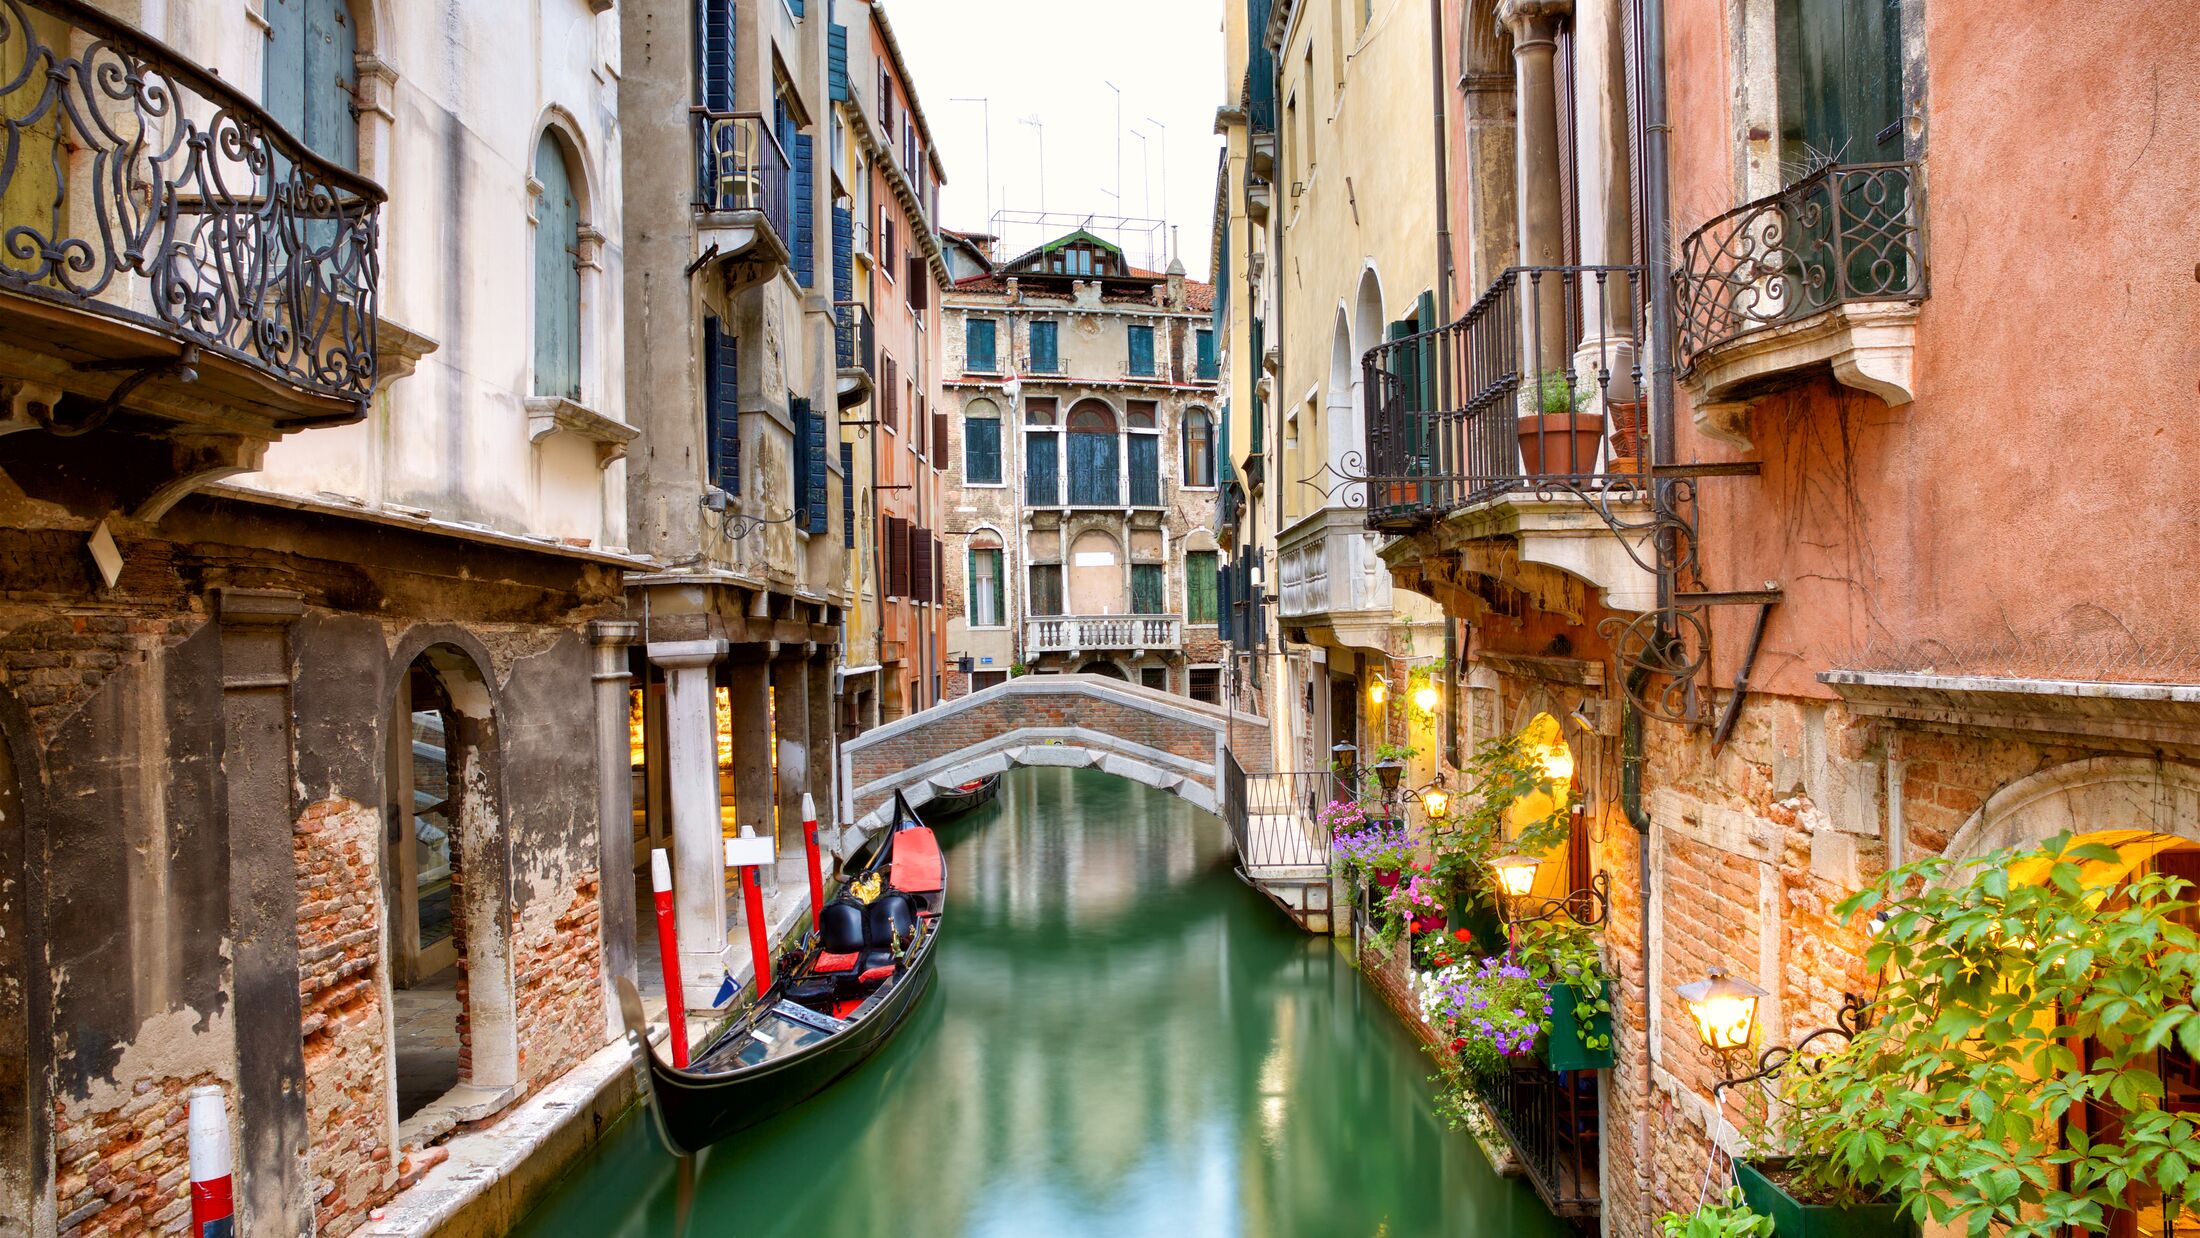 Traditional canal street with gondola in Venice, Italy